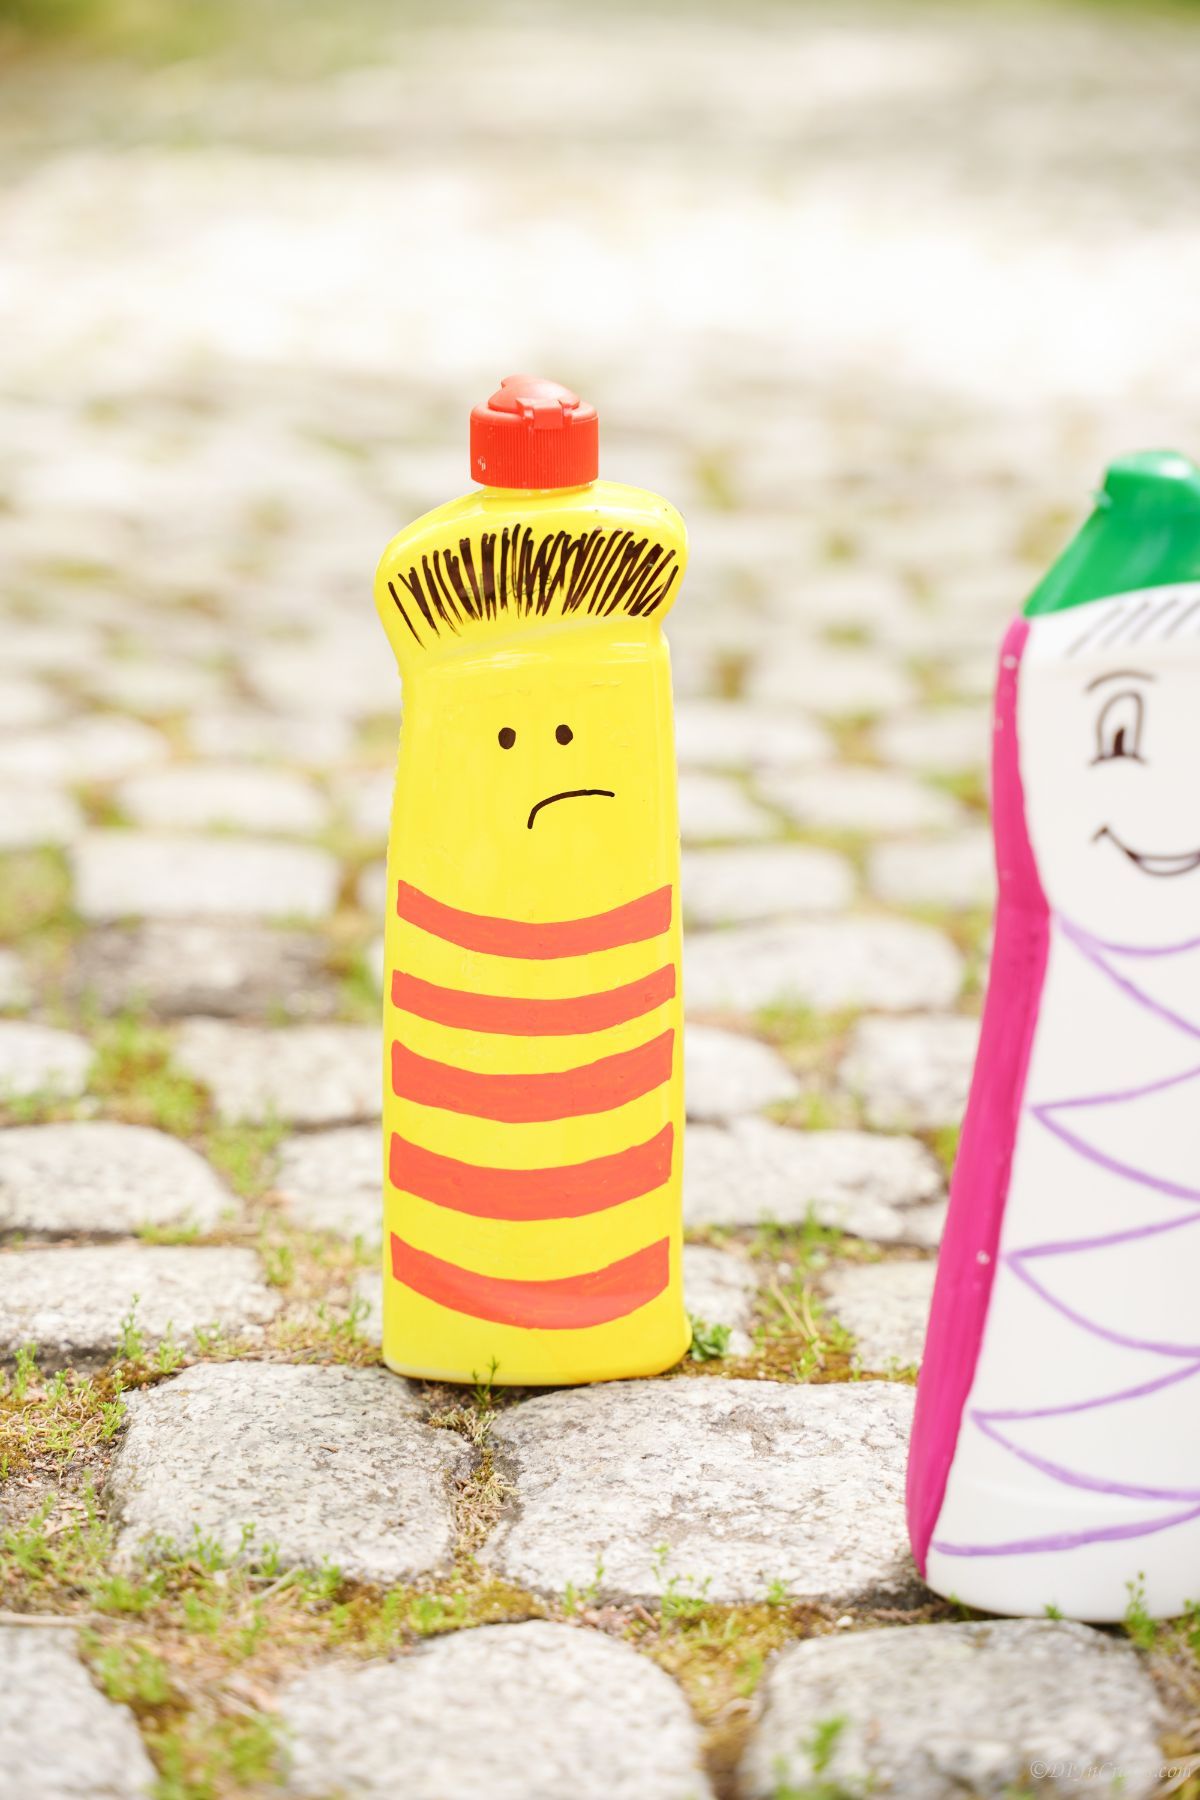 yellow and red character puppet bottle on stones